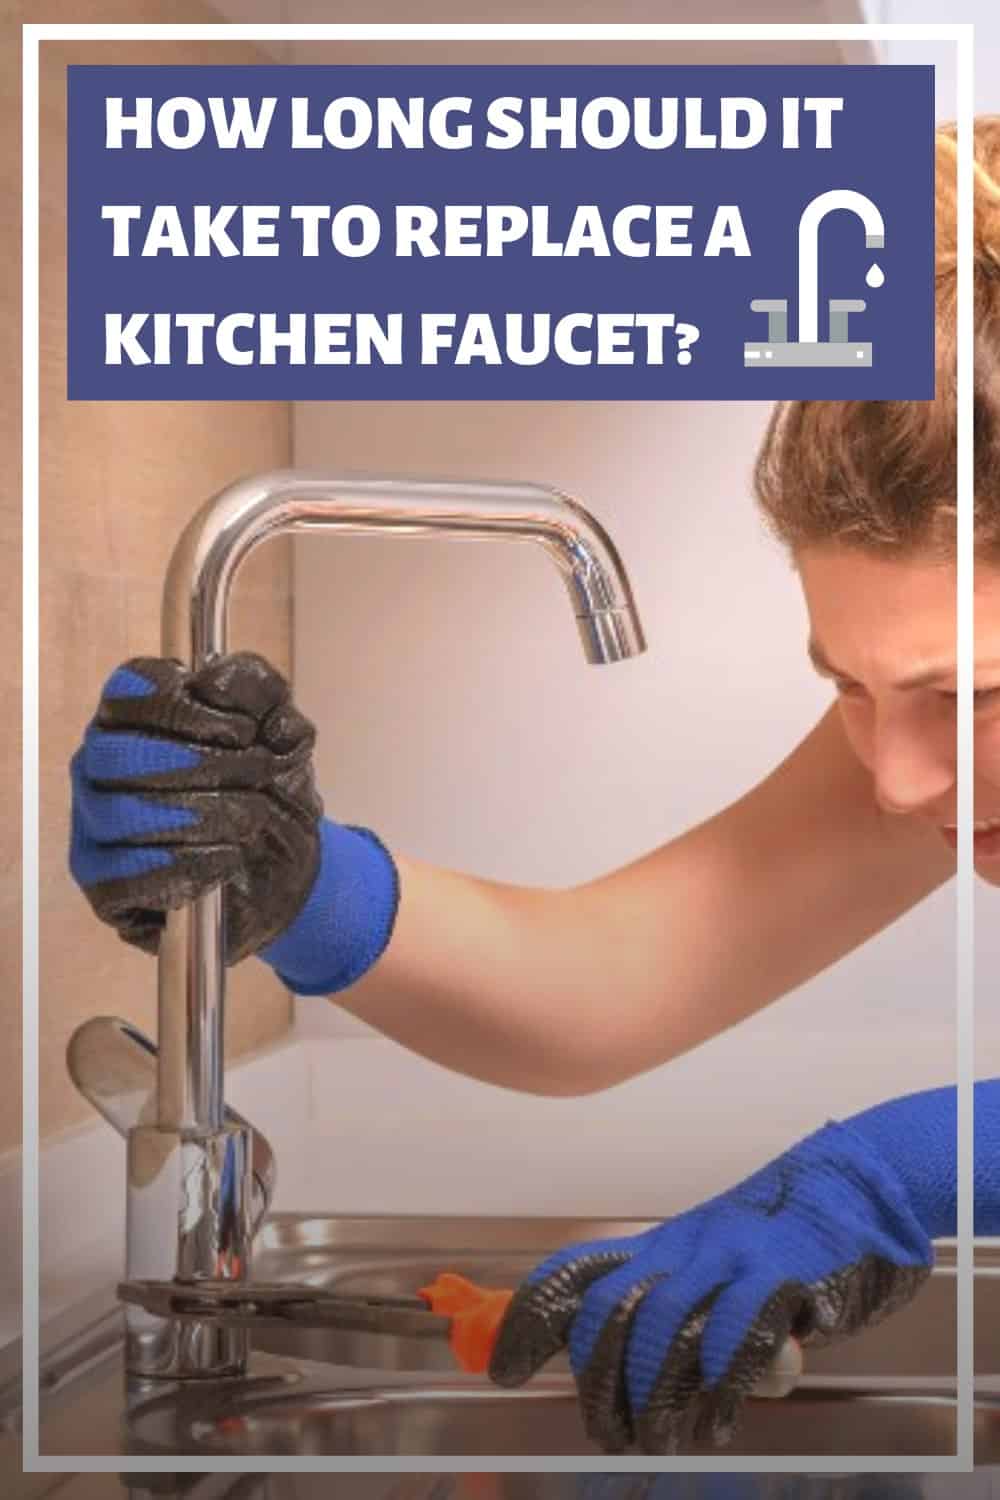 It should take about 1 hour to replace a kitchen faucet